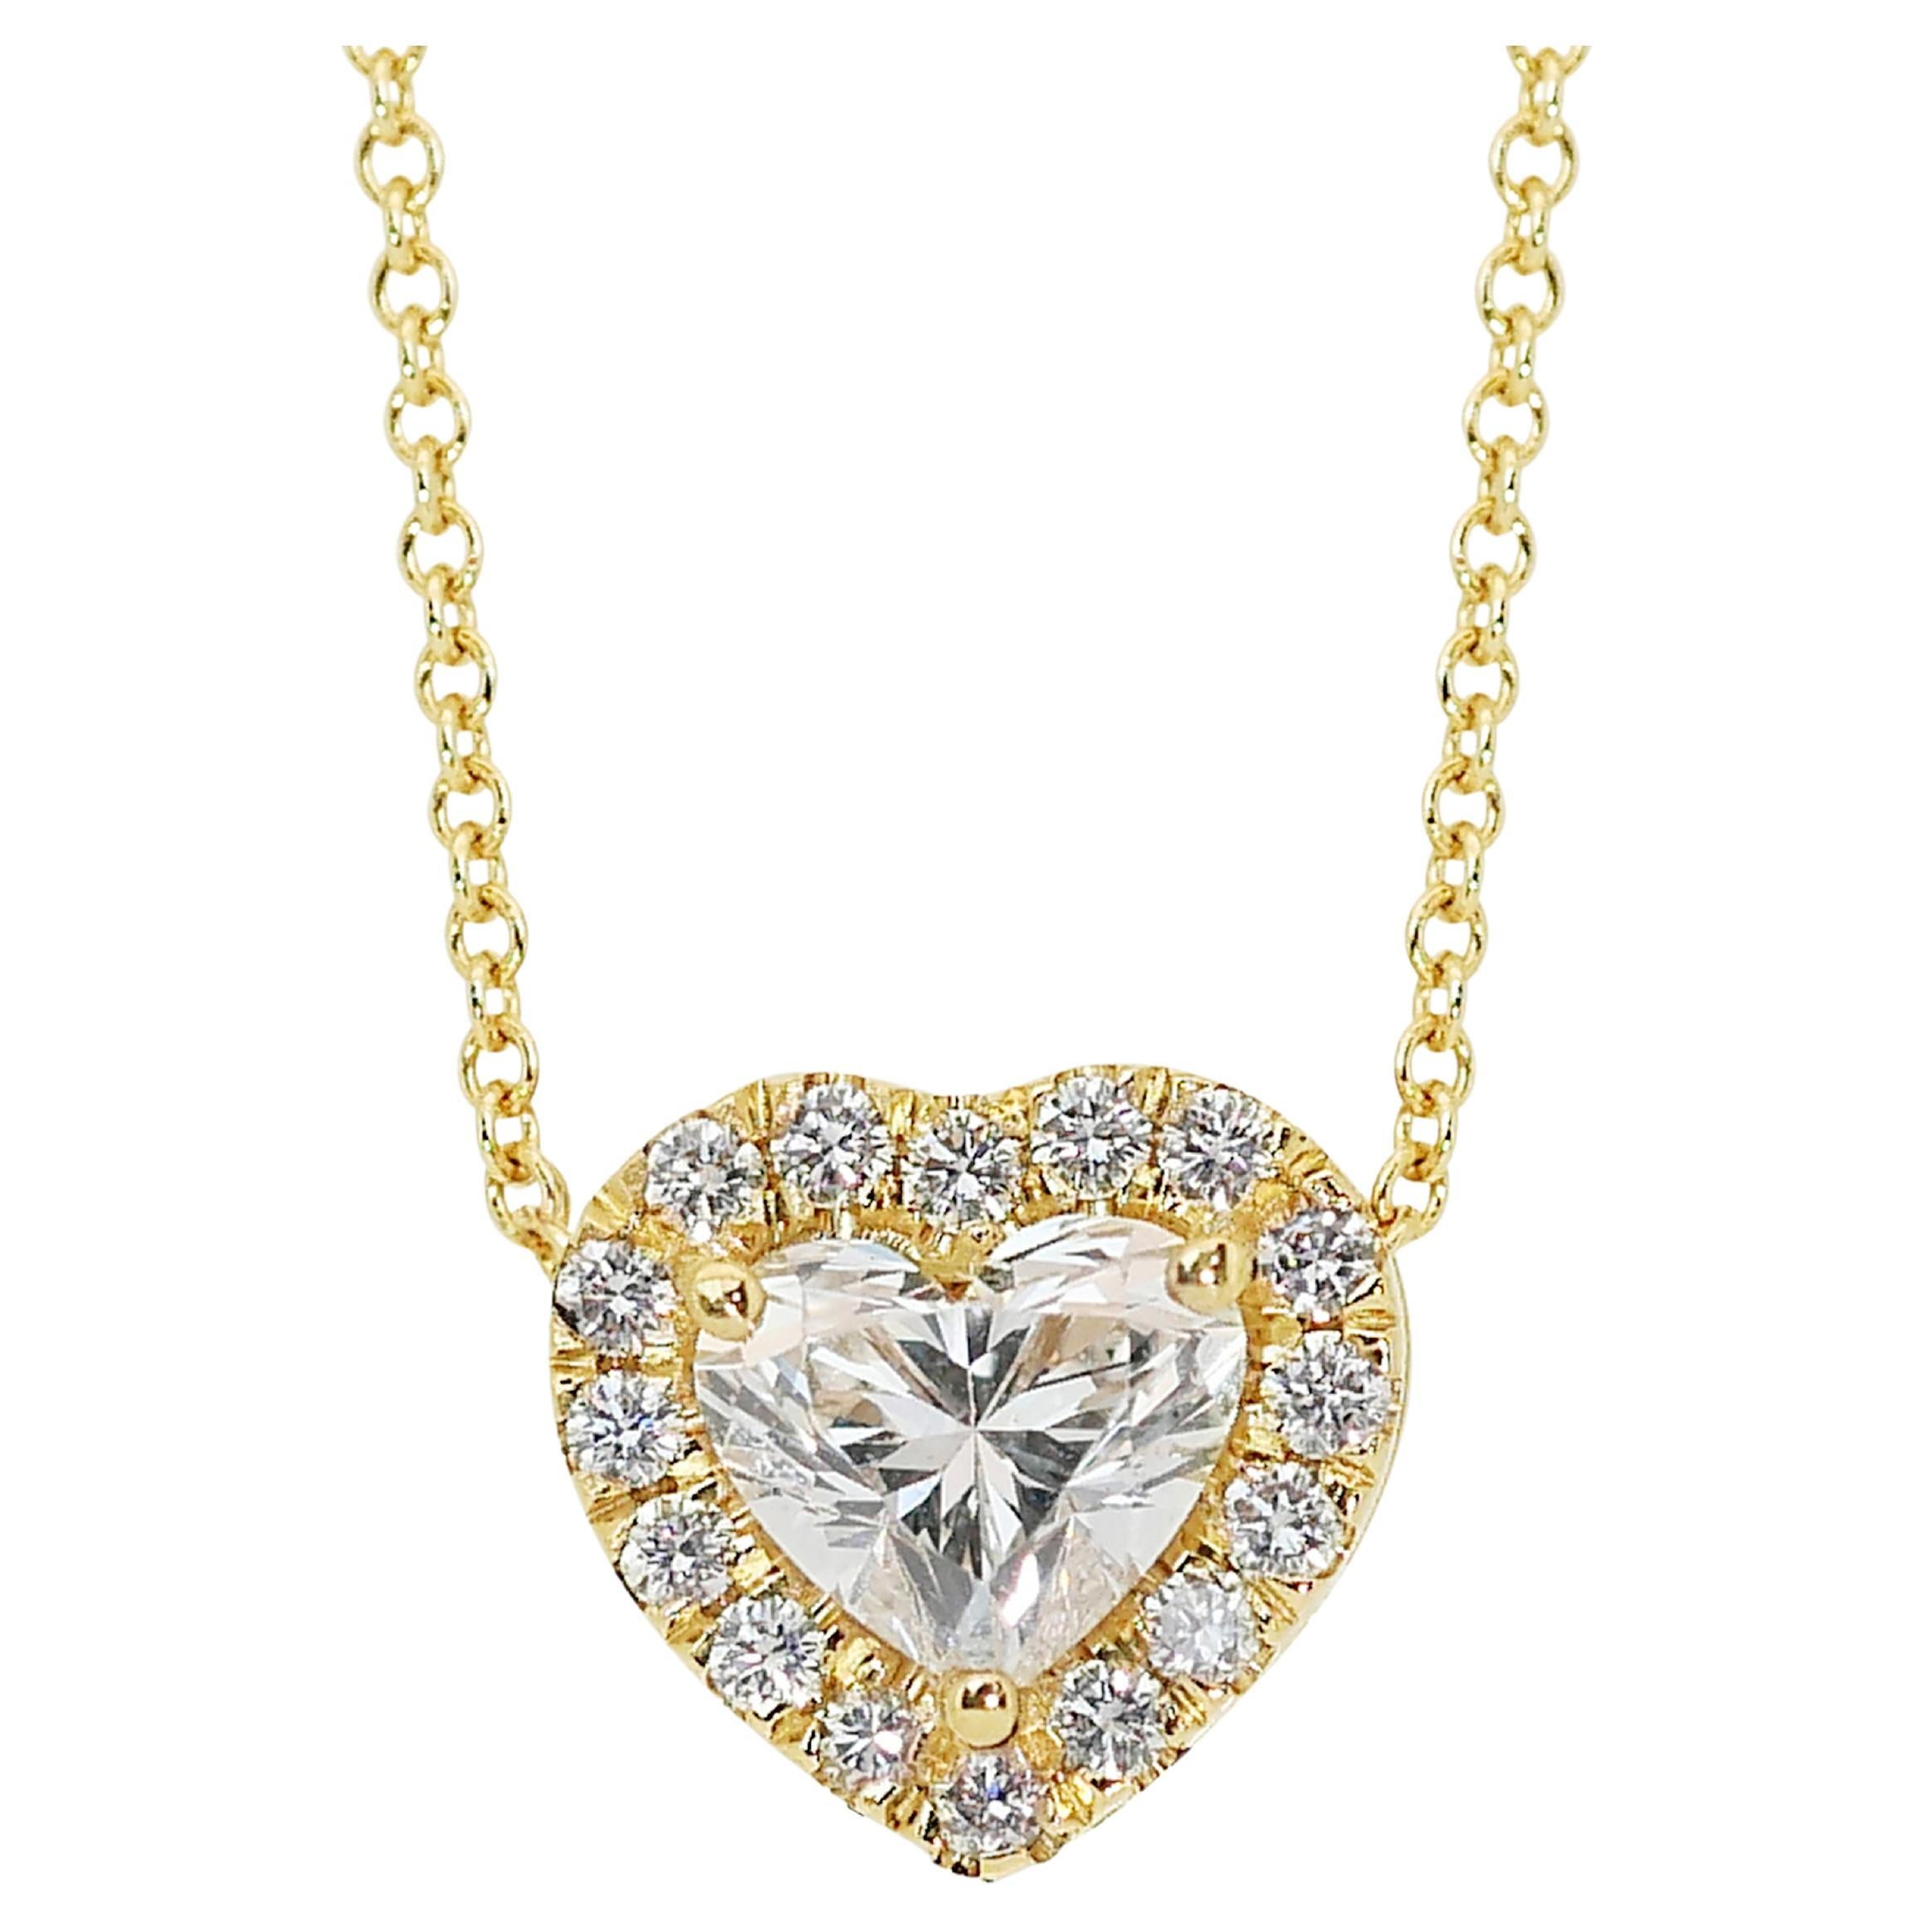 Brilliant 1.28ct Diamonds Halo Necklace in 18k Yellow Gold - IGI Certified For Sale